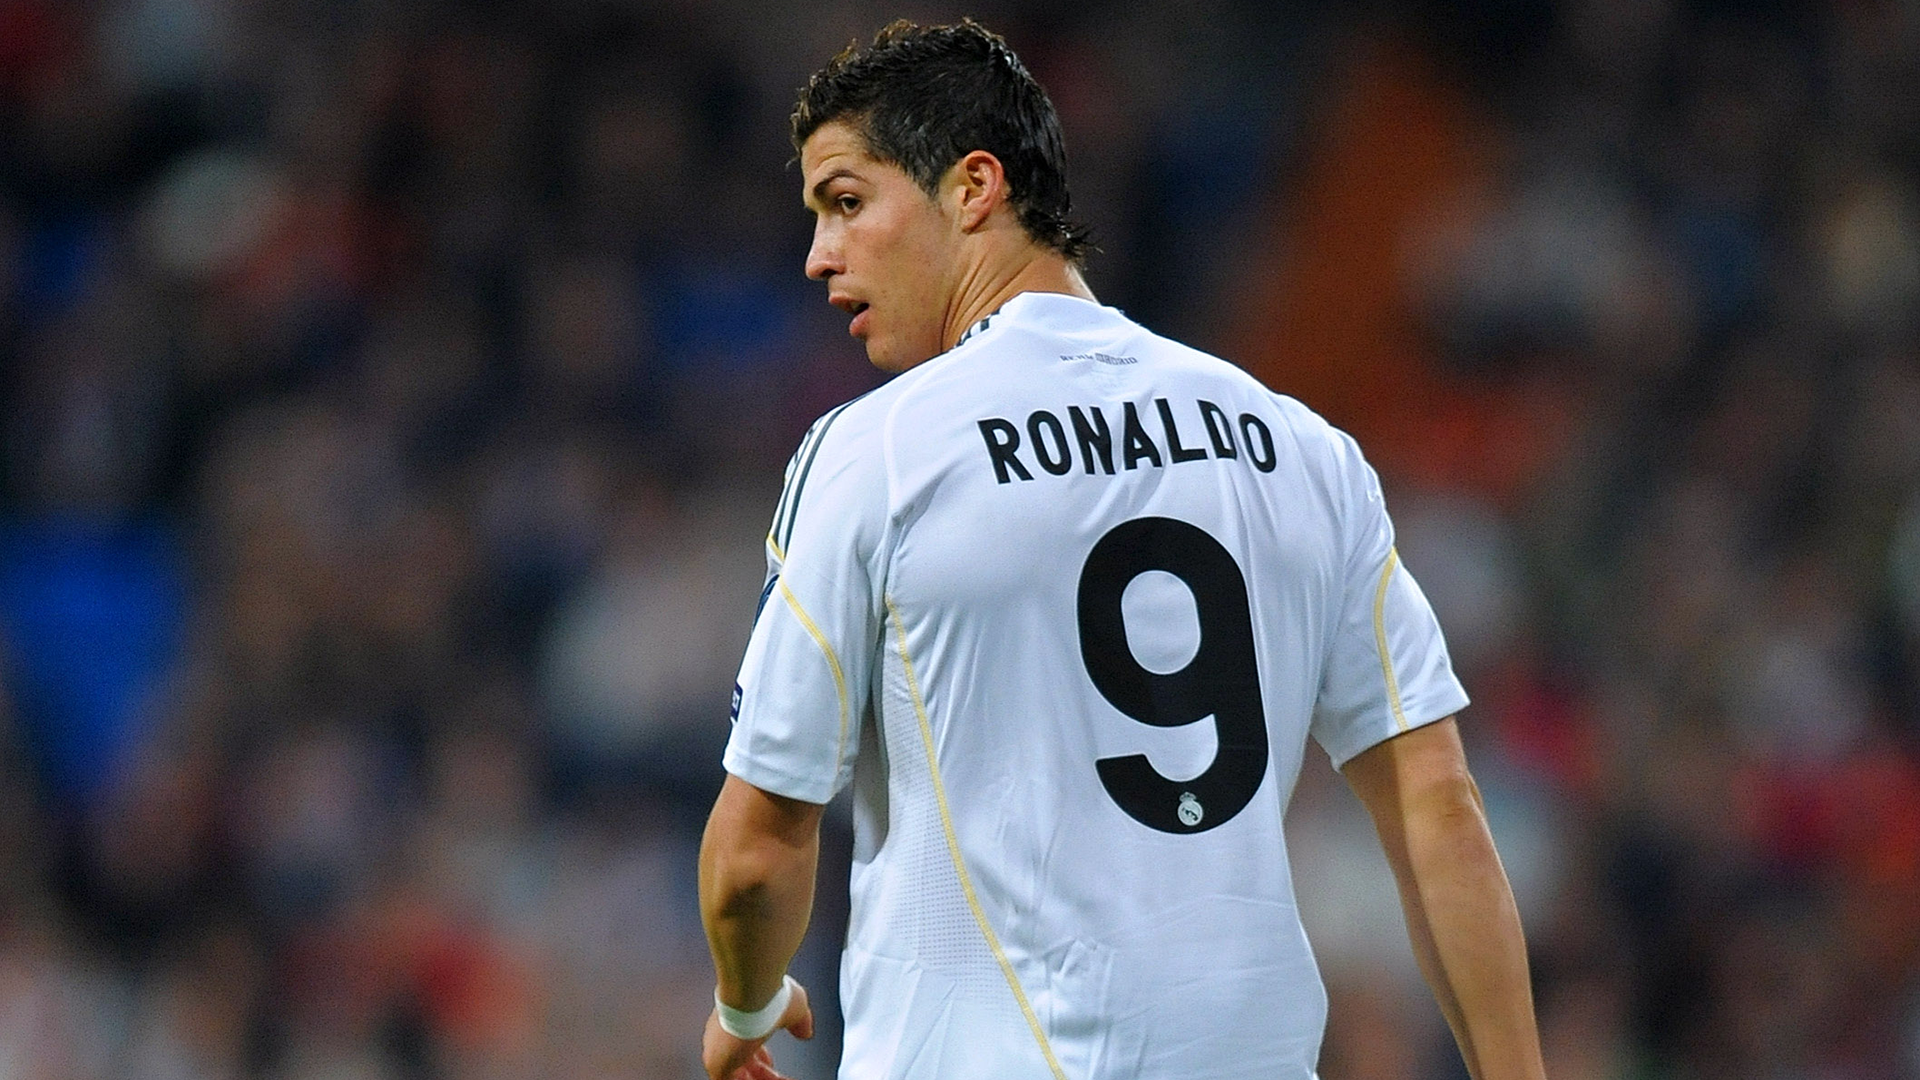 From Humble Beginnings To International Fame: The Story Of Who Ronaldo Is